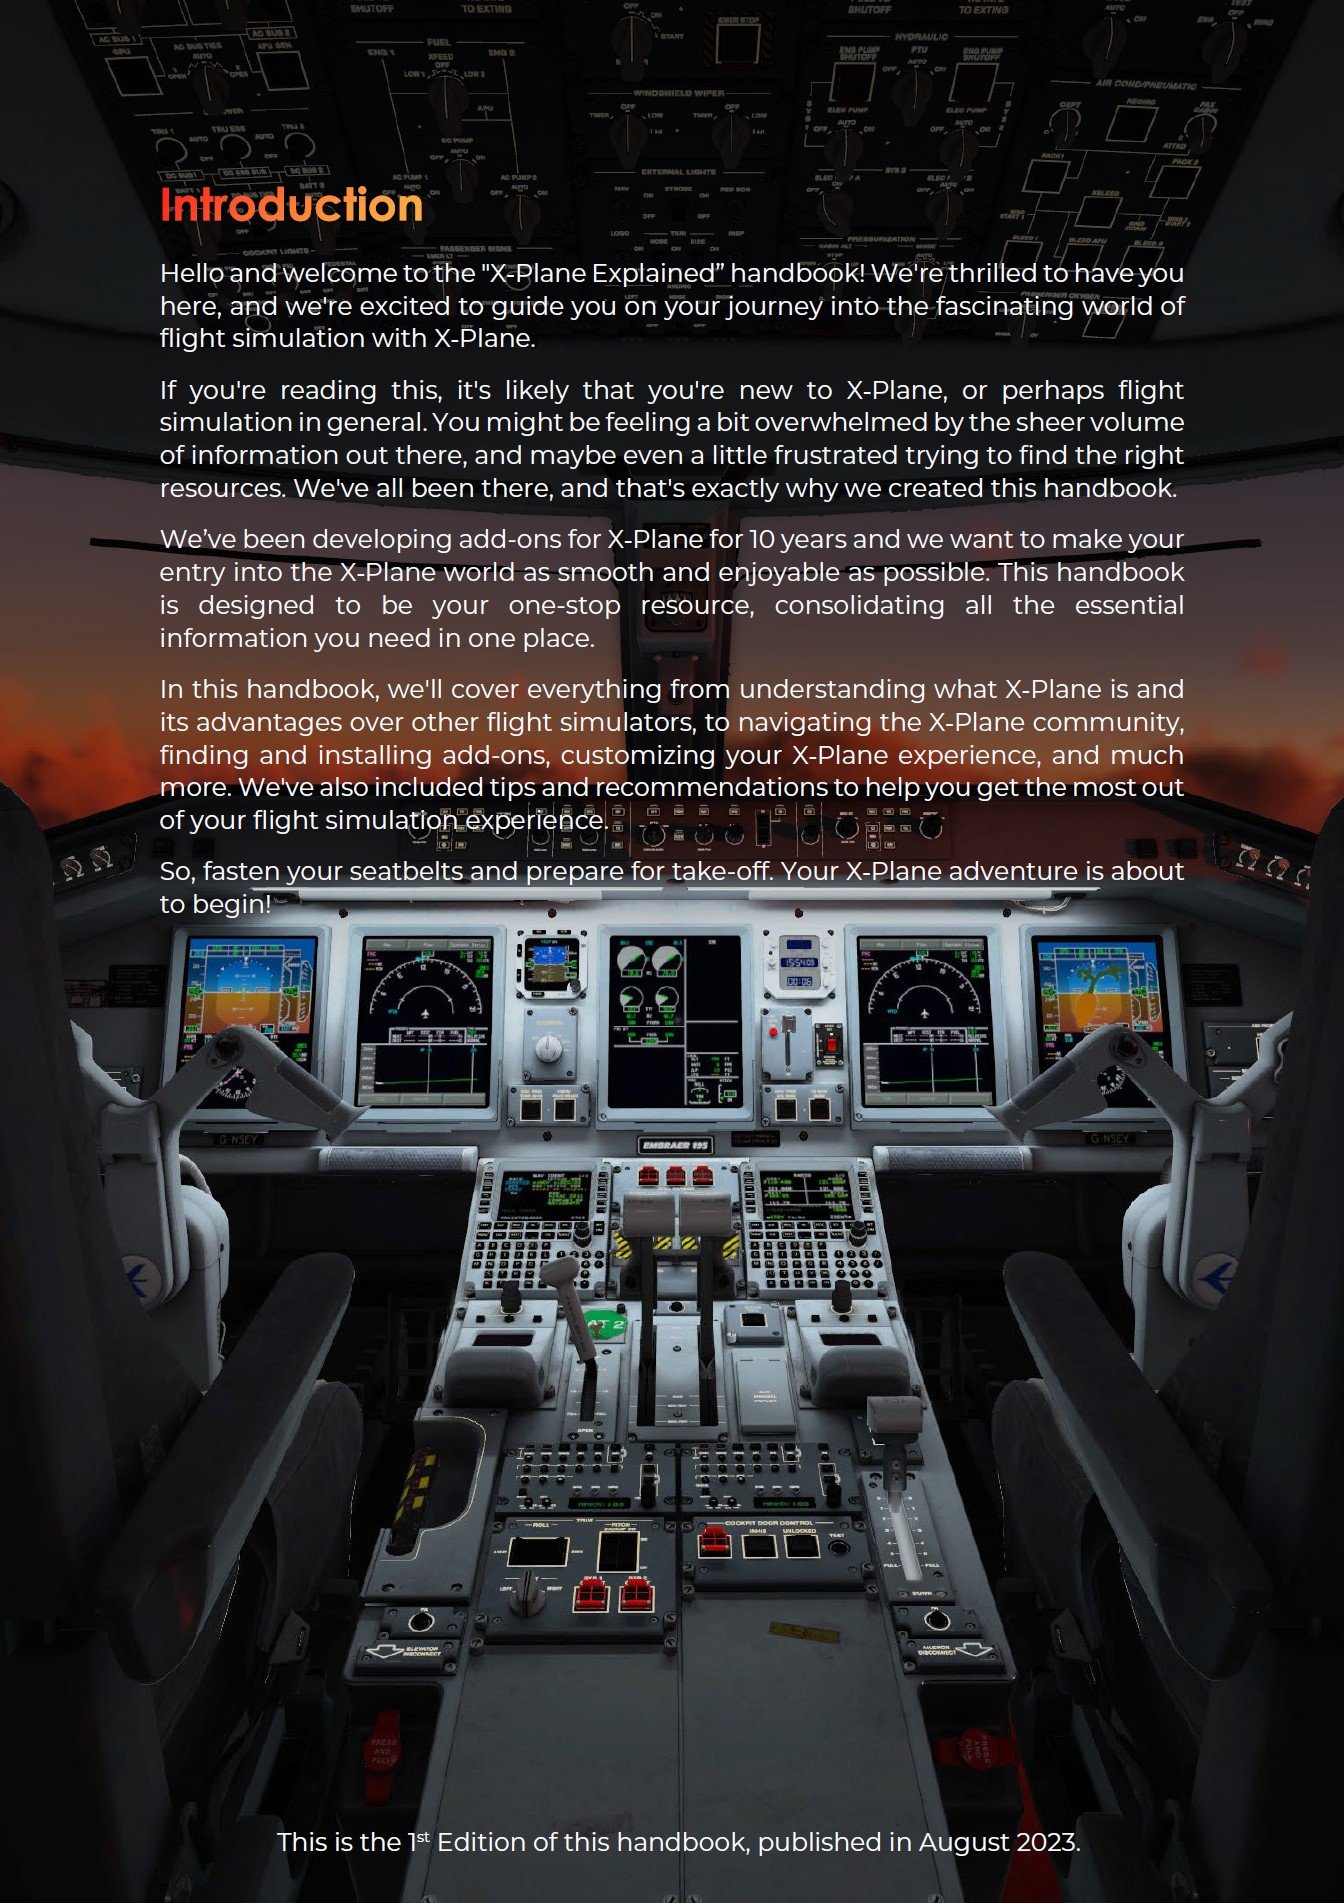 X-Plane-Explained-Your-Free-Handbook-to-Learn-X-Plane-the-Easy-Way_02.jpg